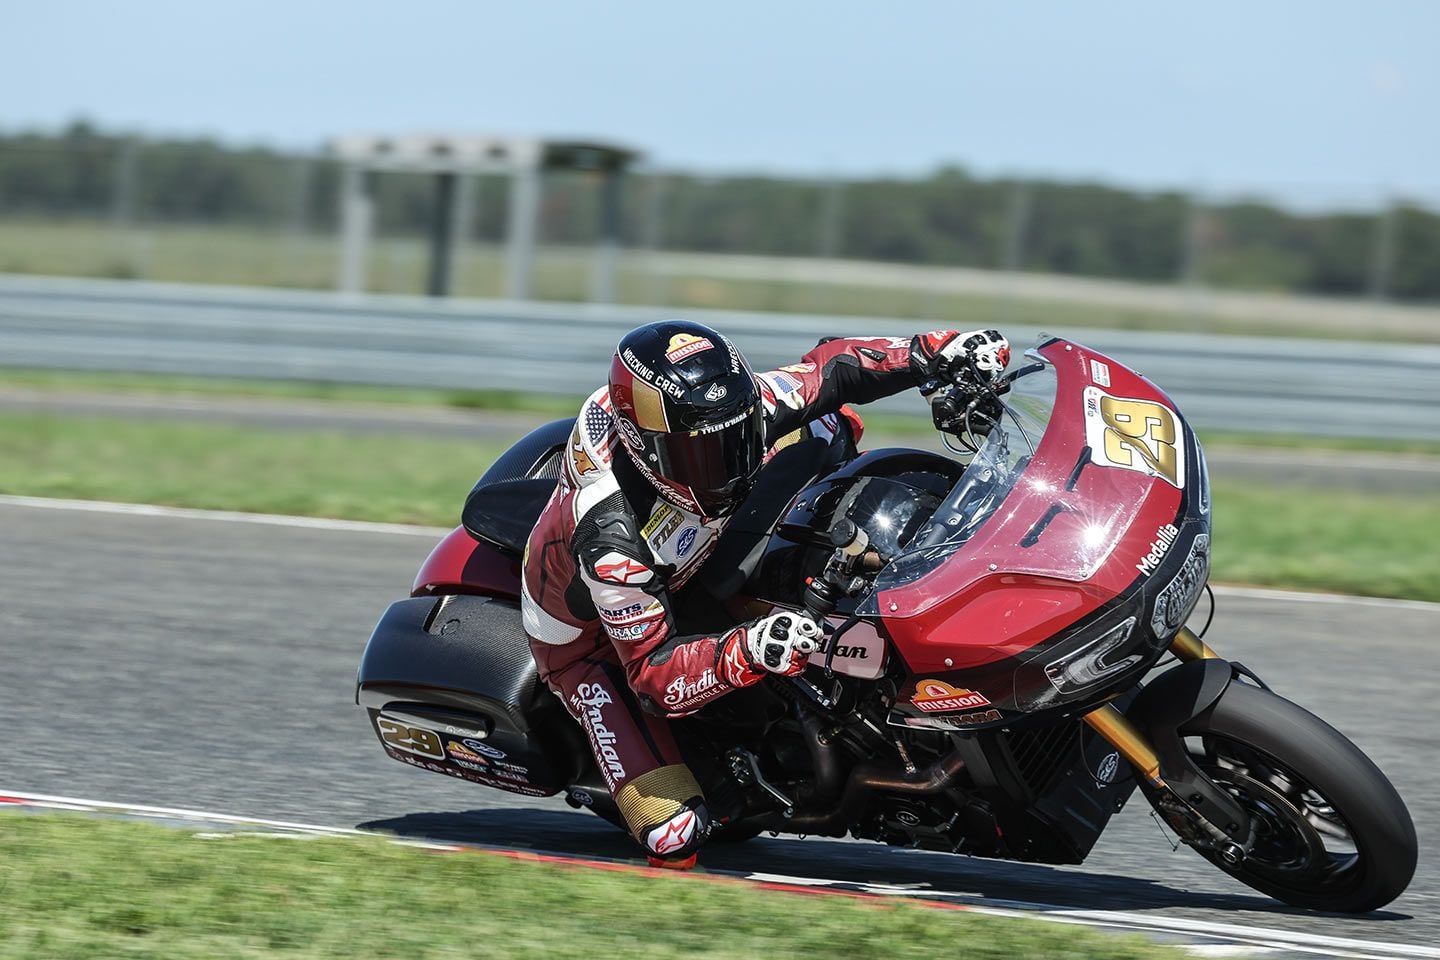 O’Hara’s ability to get the Indian Challenger around a racetrack as fast as he does is awe-inspiring. Kudos also to Indian for building a motorcycle that allows O’Hara (and teammate Jeremy McWilliams) to continue pushing the limits of what is possible on a bagger.